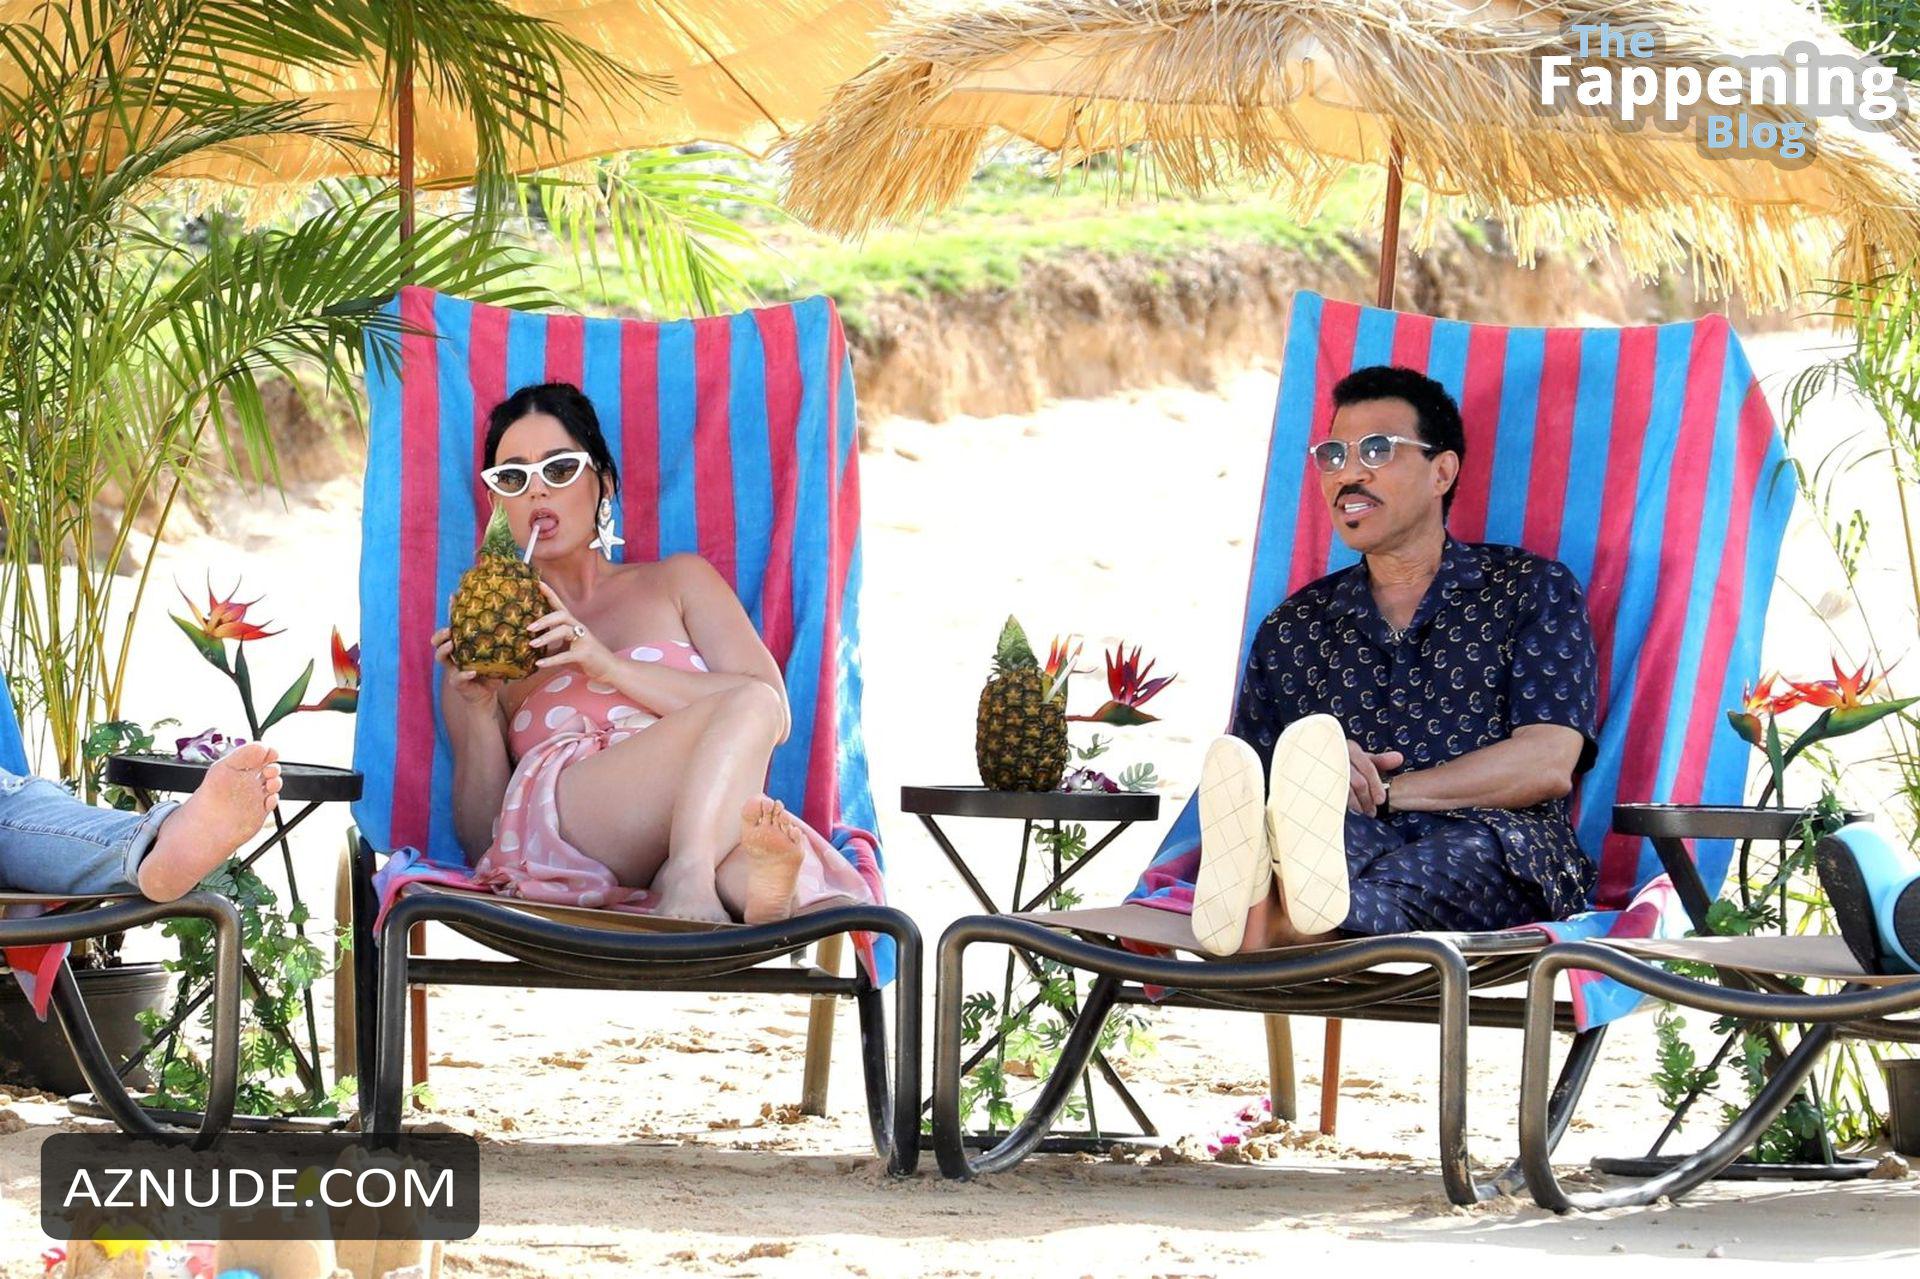 Katy Perry Sexy Shows Off Her Hot Legs During The Filming Of American Idol At Aulani Resort In 